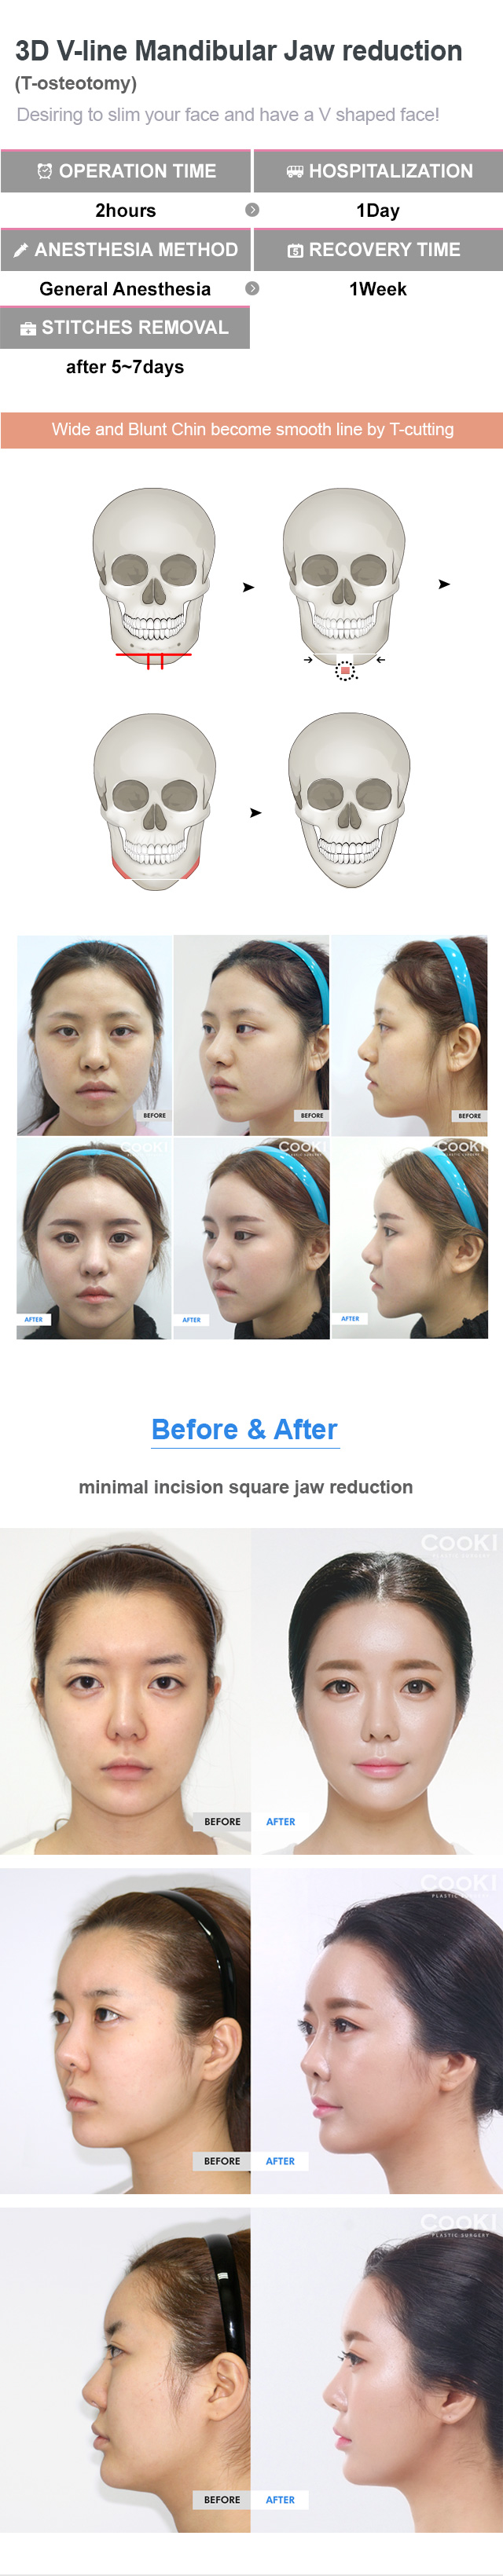 Power V Contouring, Double Chin Surgery, Fat Graft Cheeks, Double Chin  Surgery Before And After In Seoul Korea